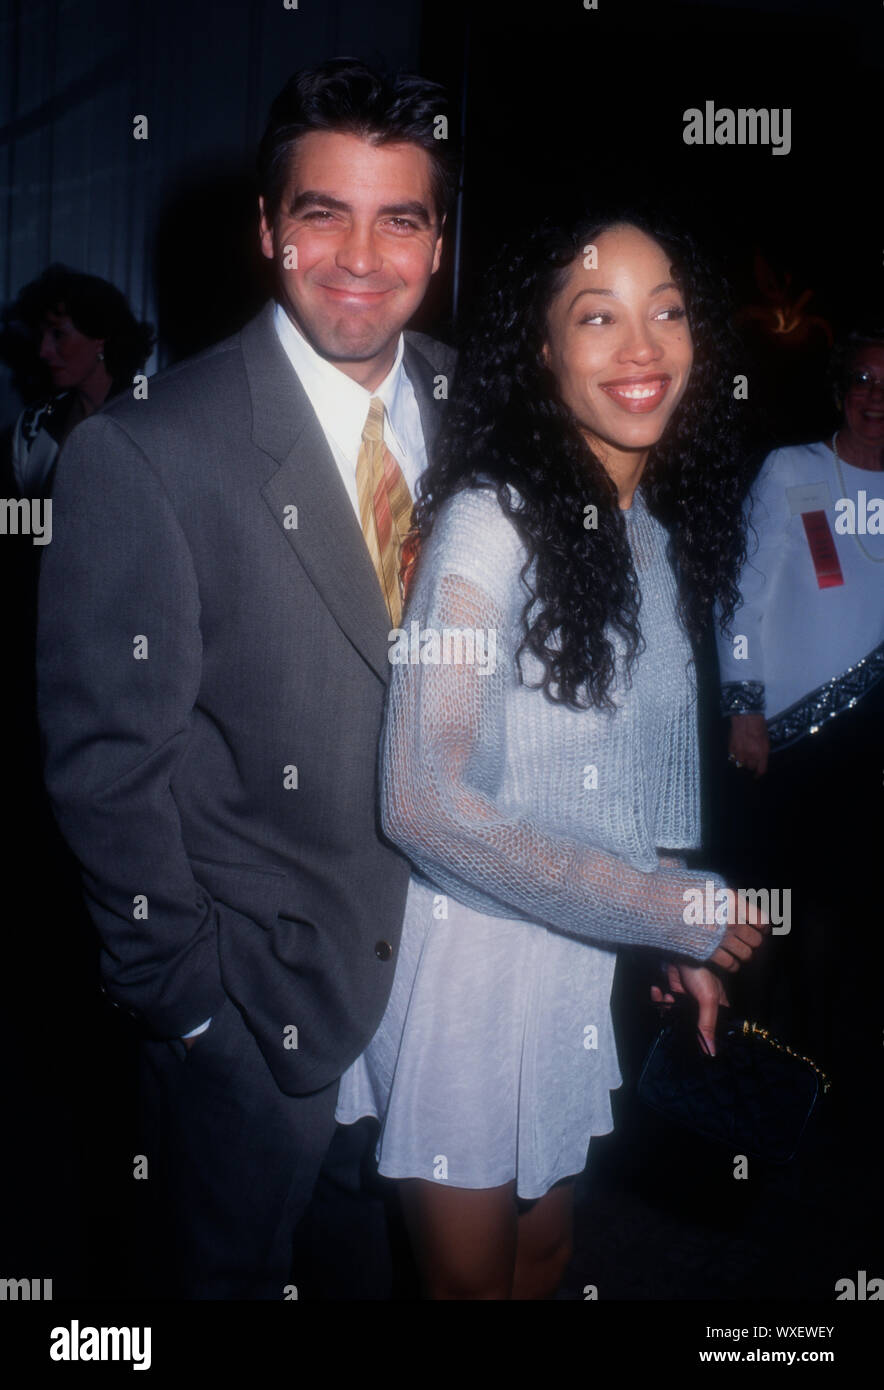 Beverly Hills, California, USA 11th December 1994 Actor George Clooney and actress Kimberly Russell attend the Hollywood Women's Press Club's 54th Annual Golden Apple Awards on December 11, 1994 at Beverly Hilton Hotel in Beverly Hills, California, USA.  Photo by Barry King/Alamy Stock Photo Stock Photo